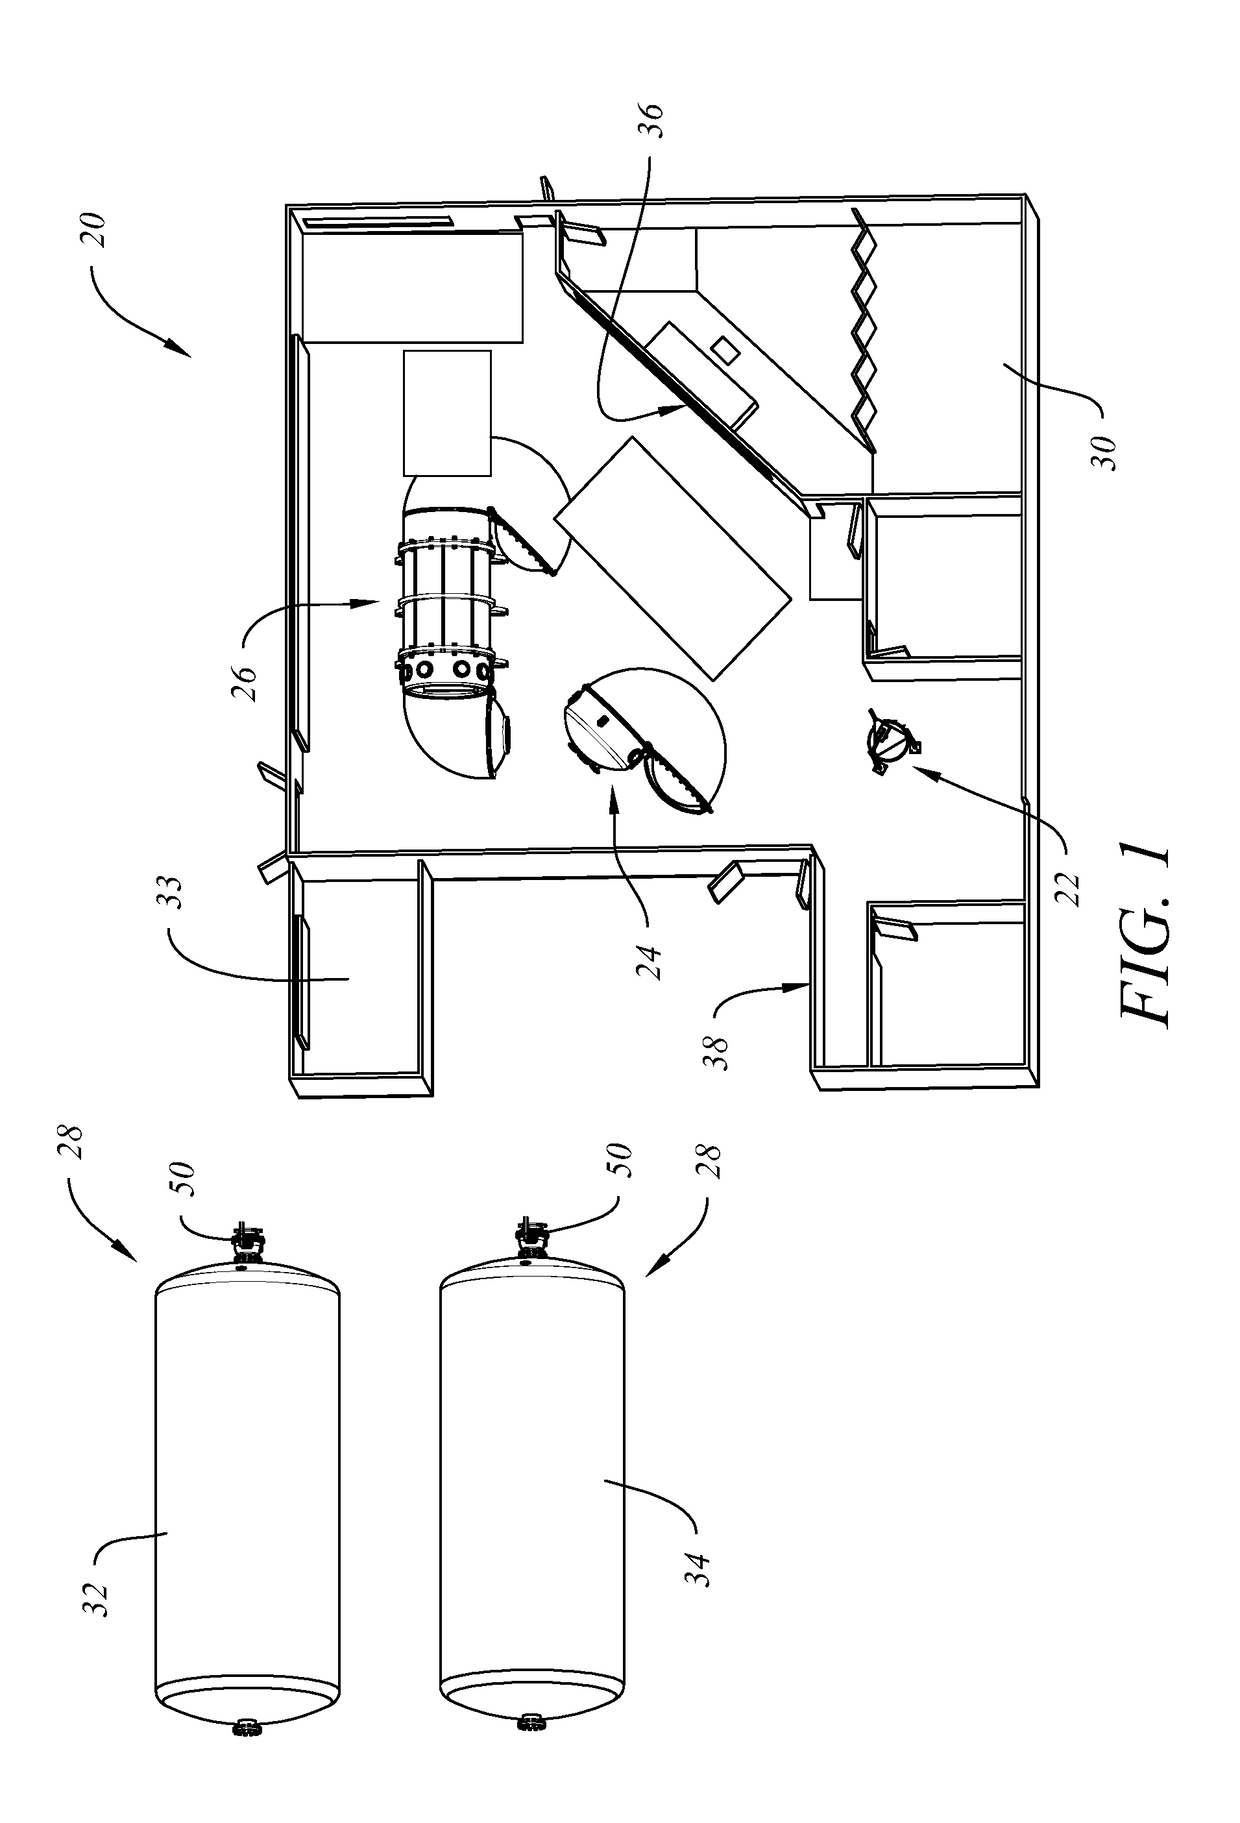 Hypobaric System and Apparatus